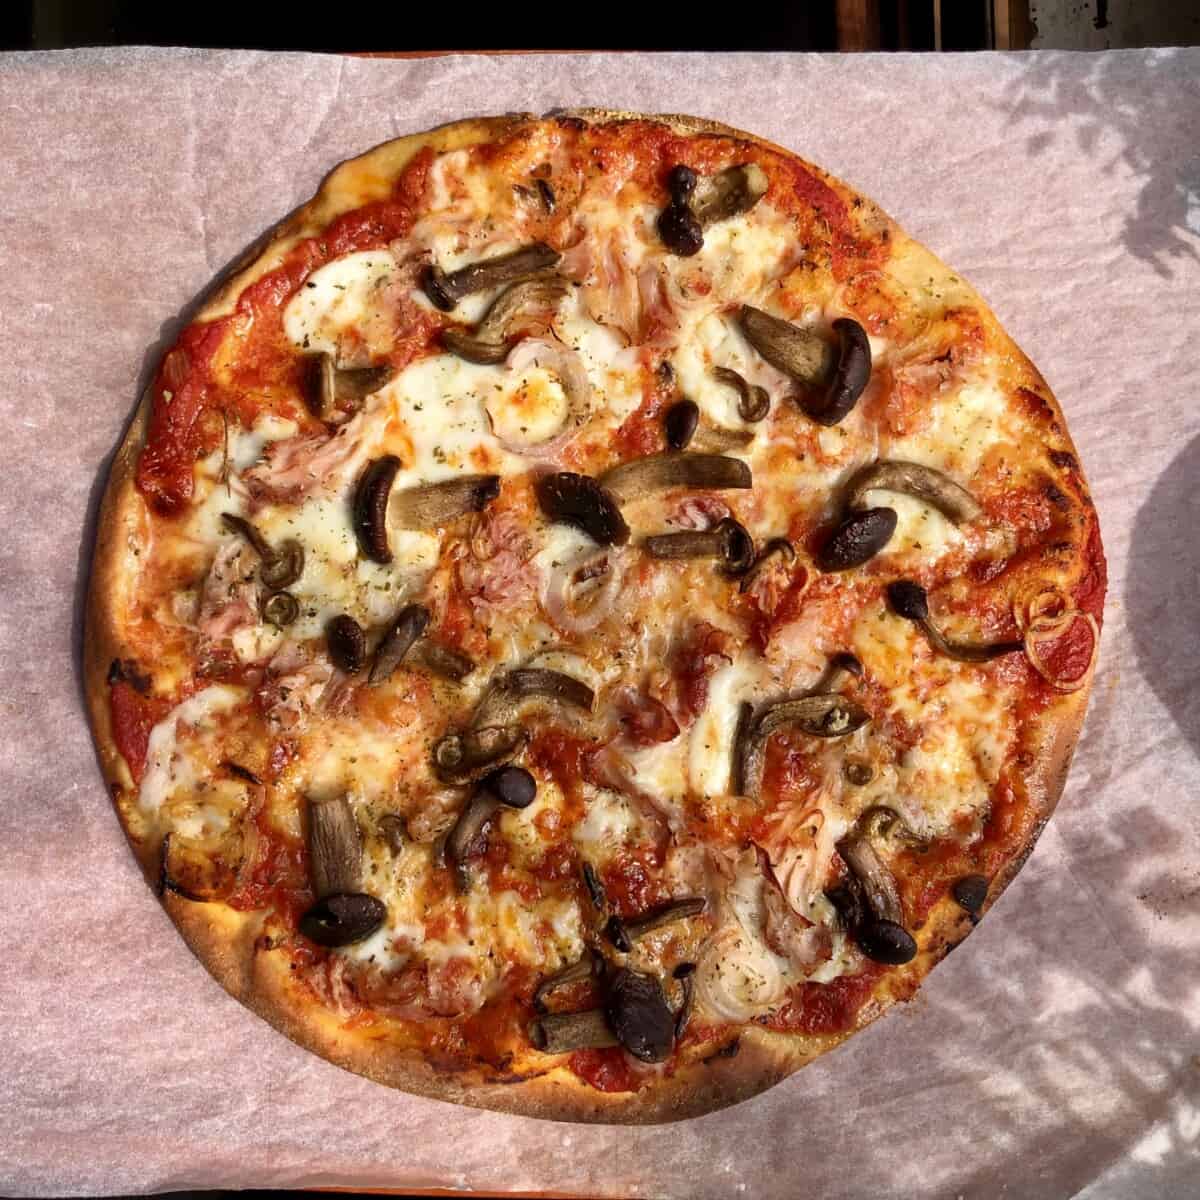 Homemade thin crust pizza with pioppini mushrooms, salame piccante (like spicy pepperonit but larger and way better tasting), halved large shallots, mozzarella and bufula mozzarella and prosciutto cotto (Italian ham)